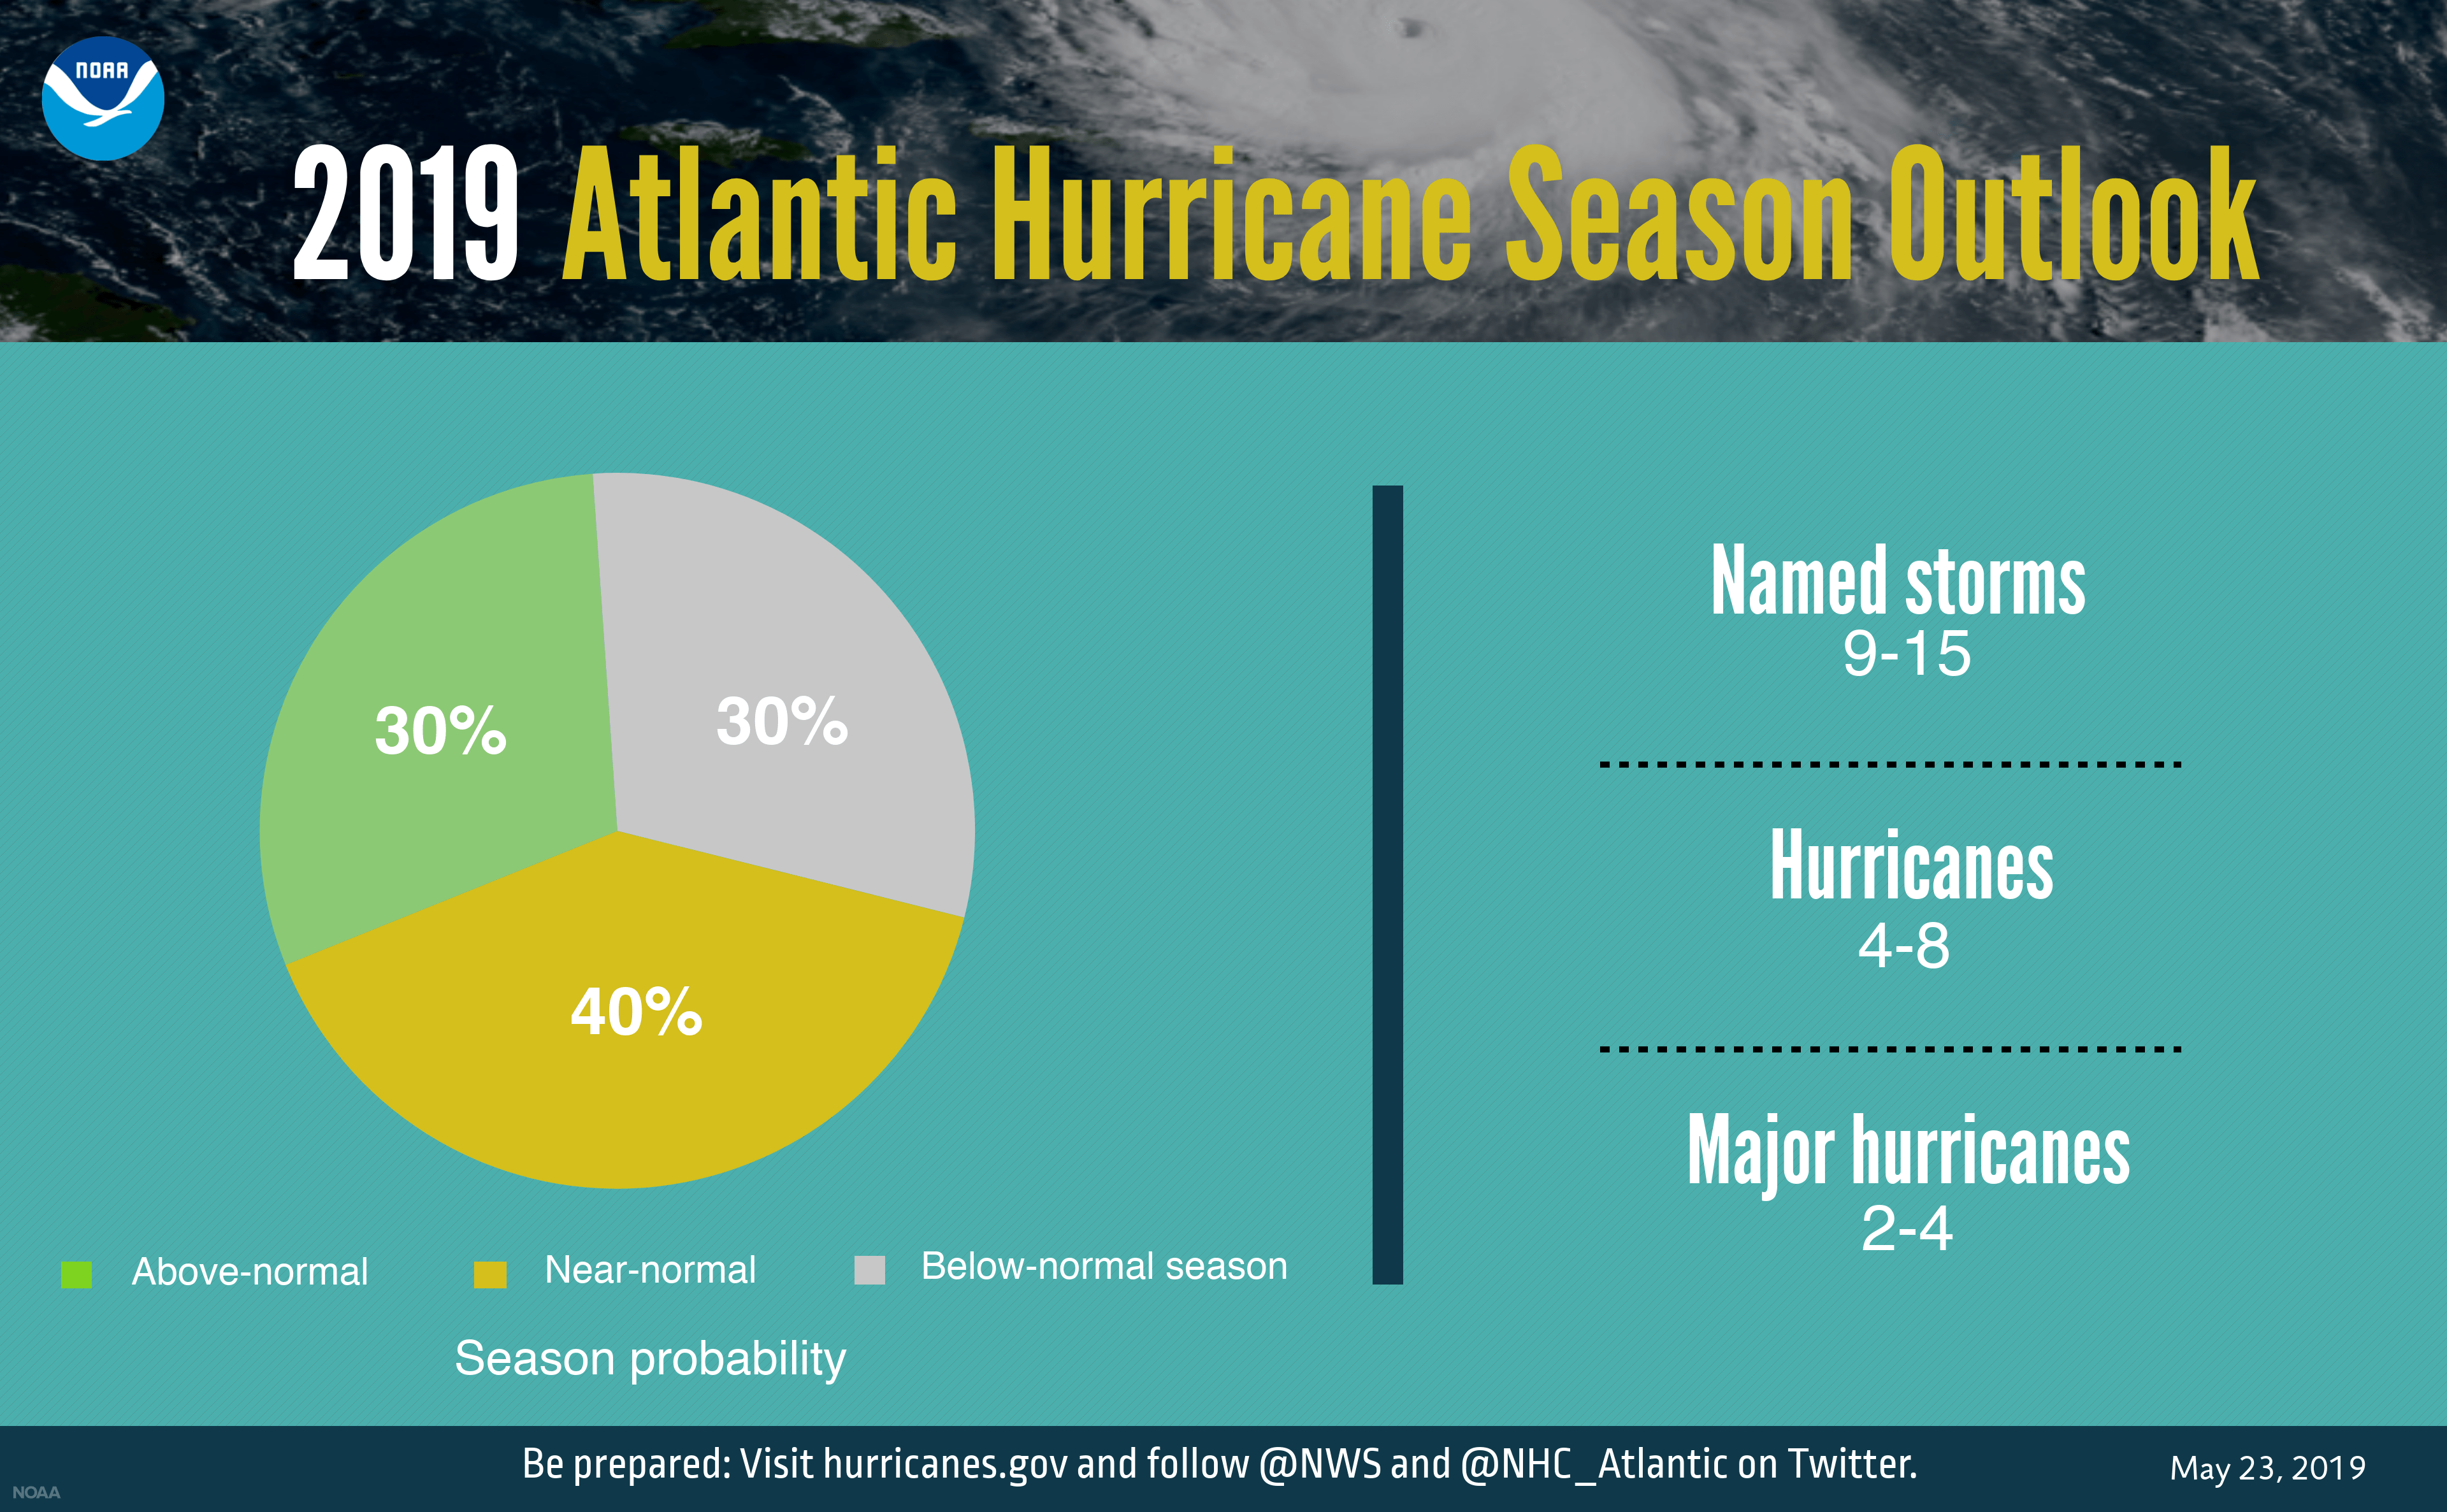 Image courtesy of NOAA. (A graphic showing hurricane season probability and numbers of named storms)